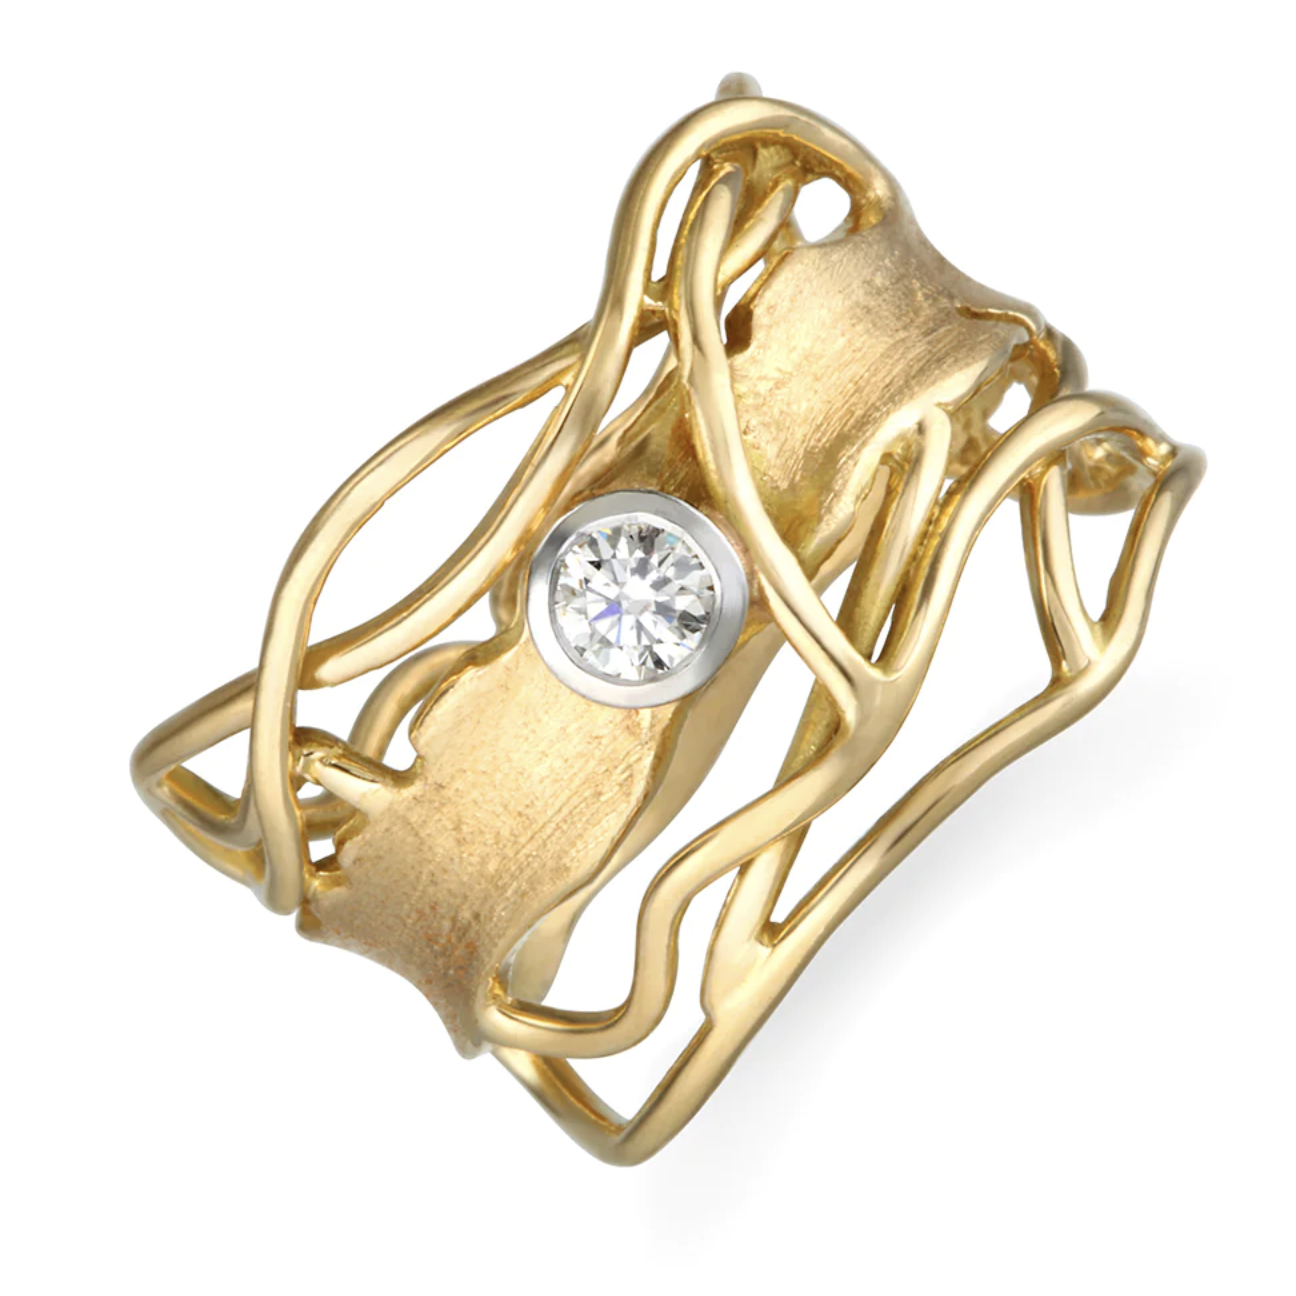 Edge Ring in Gold with Diamond by Q Evon